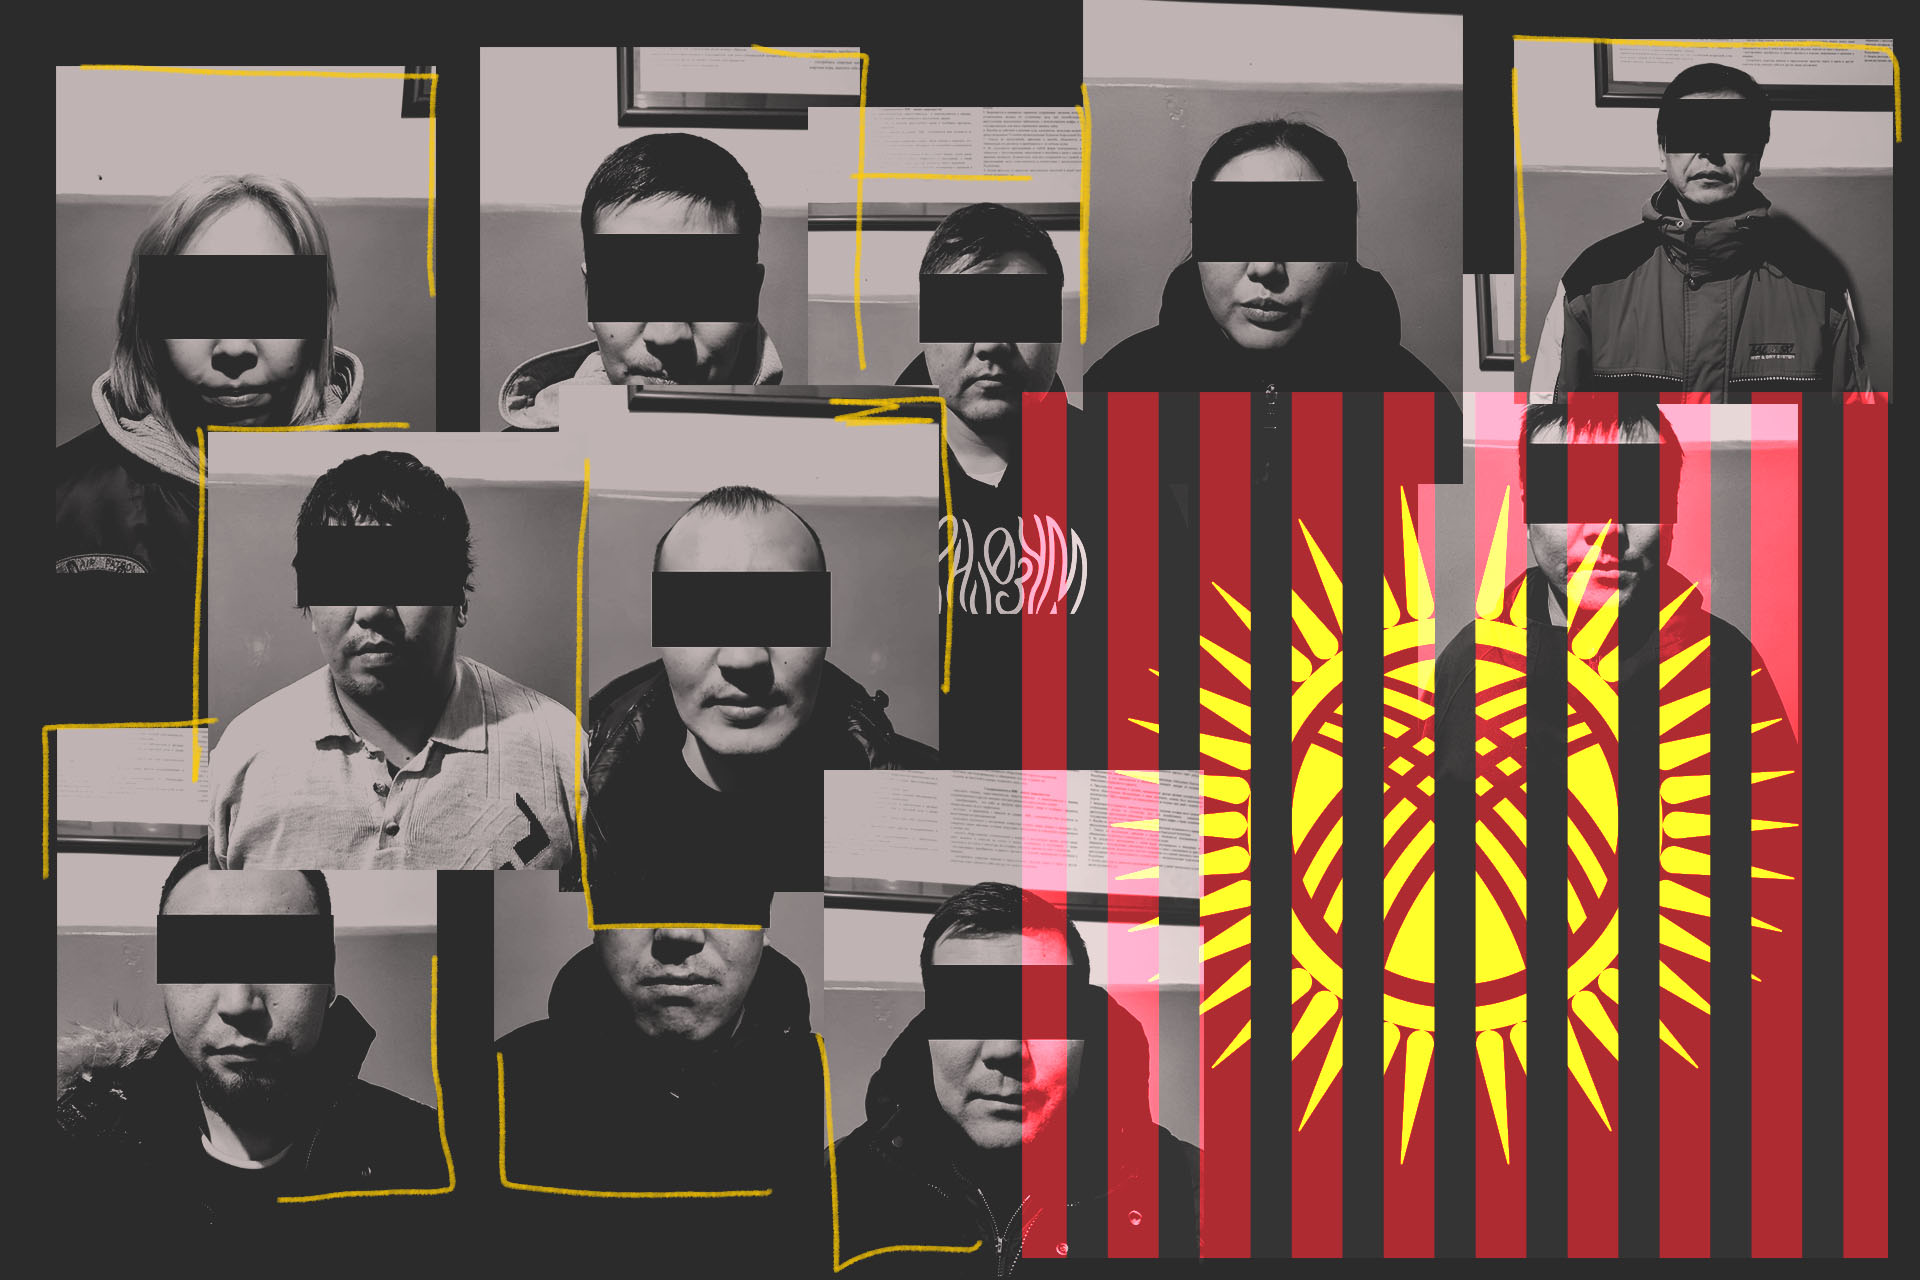  With Journalists Behind Bars, Kyrgyzstan Enters New Era of Repression